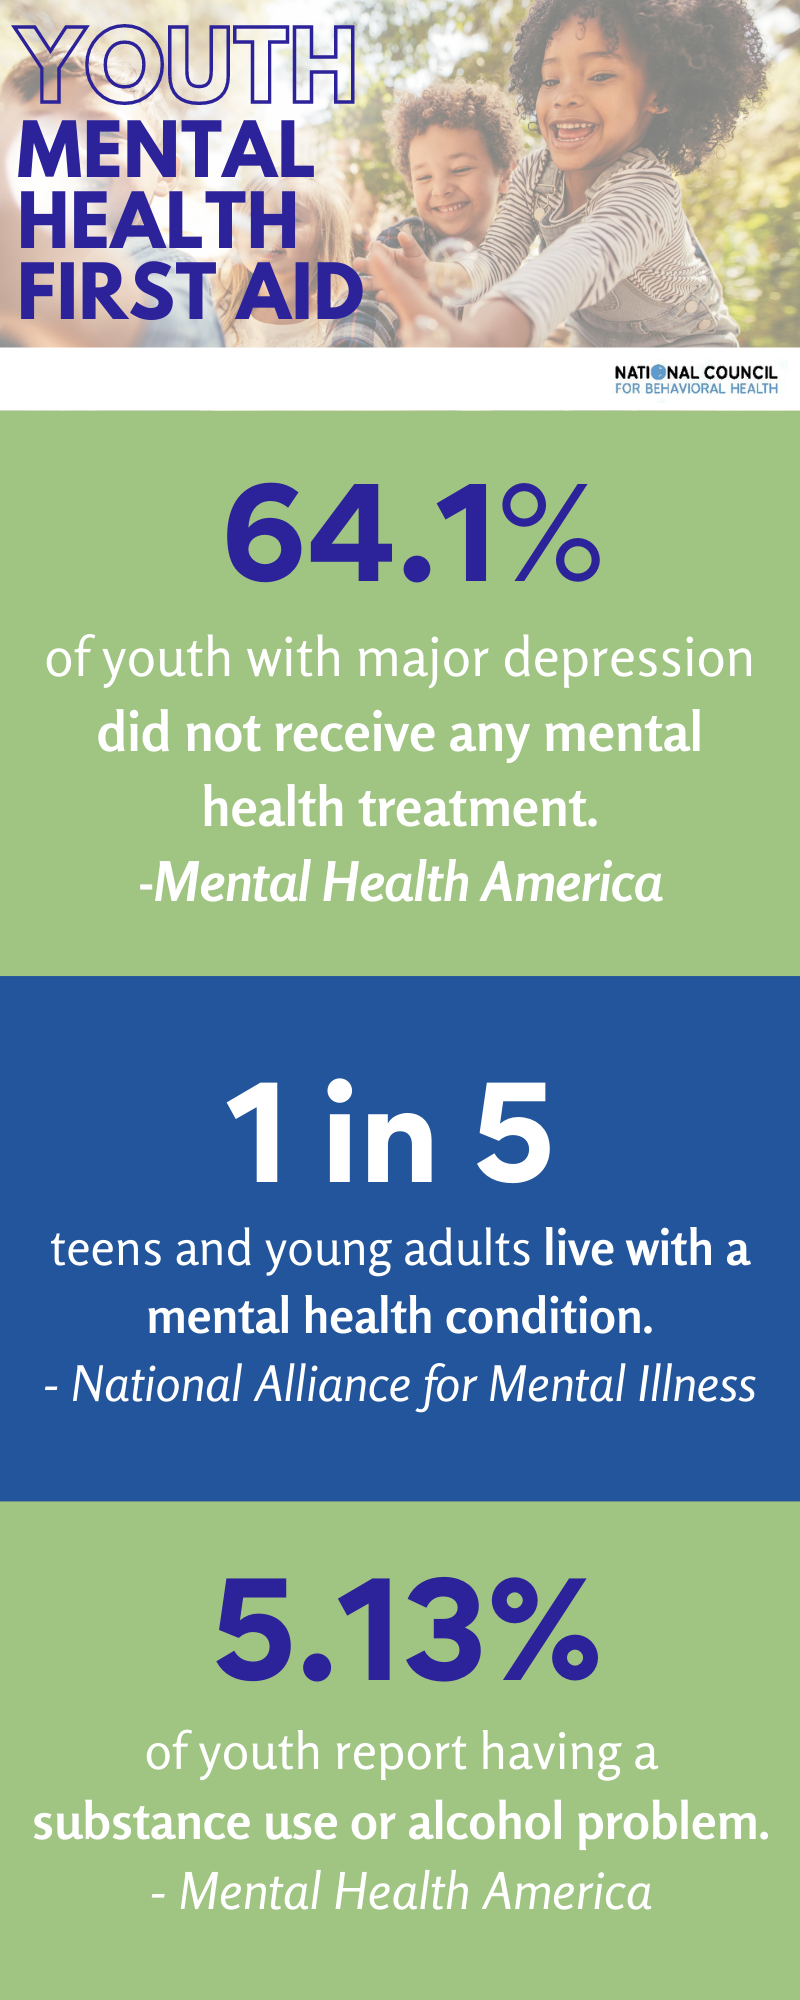 Youth mental health first aid